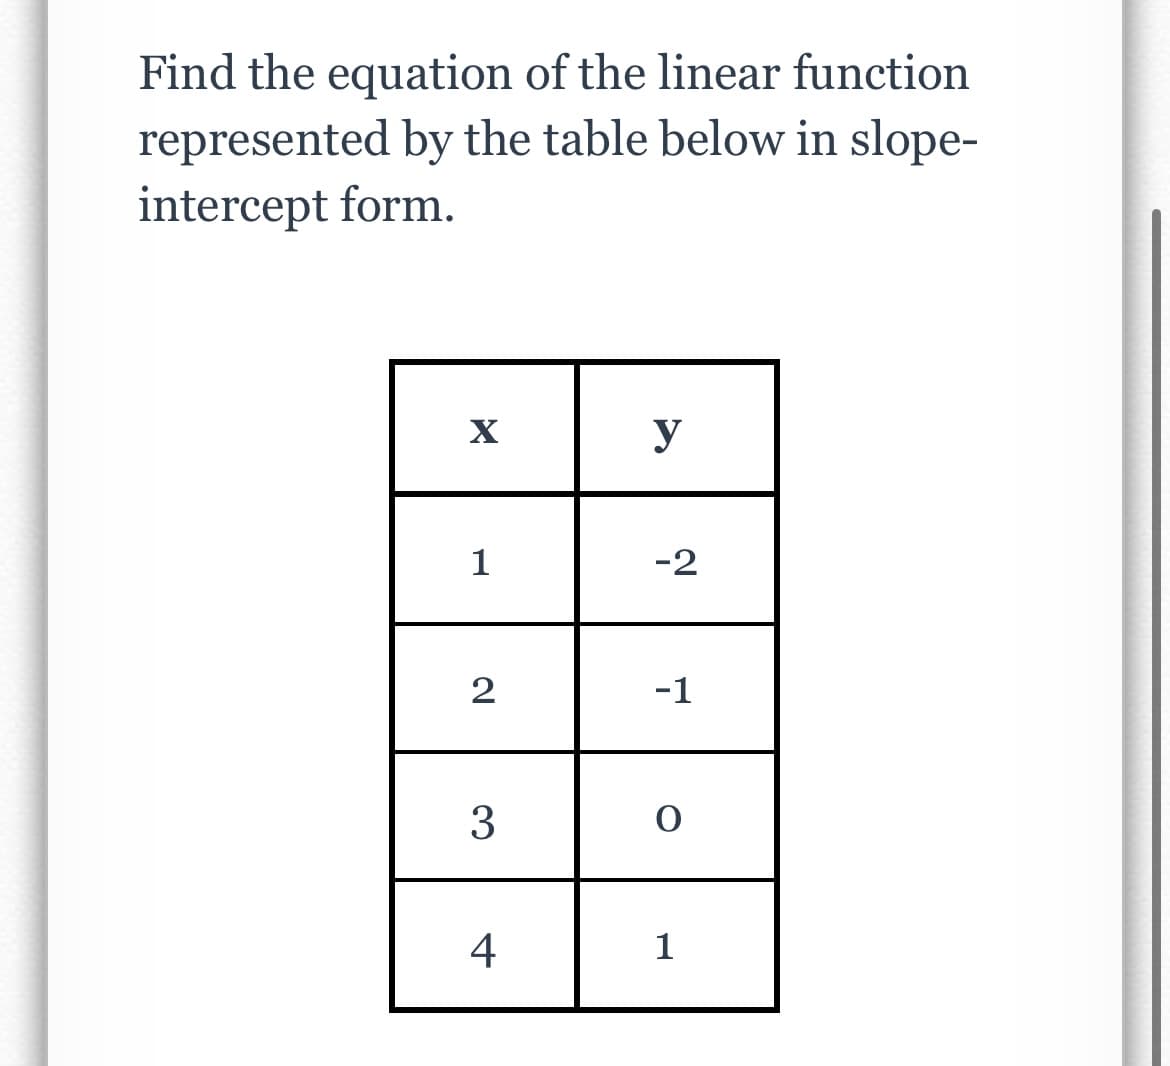 Find the equation of the linear function
represented by the table below in slope-
intercept form.
X
1
2
3
4
y
-2
-1
O
1